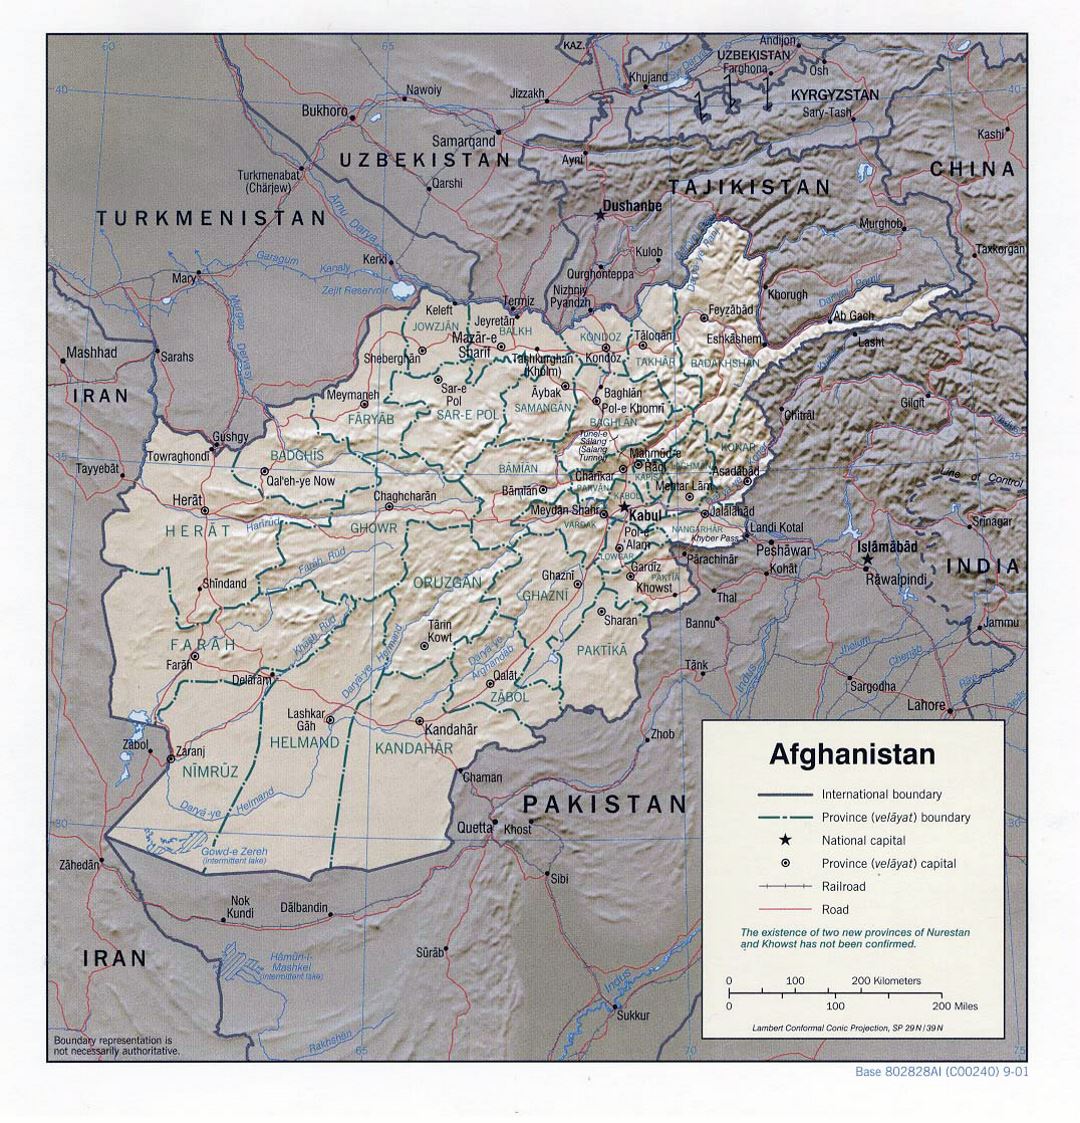 Detailed political and administrative map of Afghanistan with relief - 2001